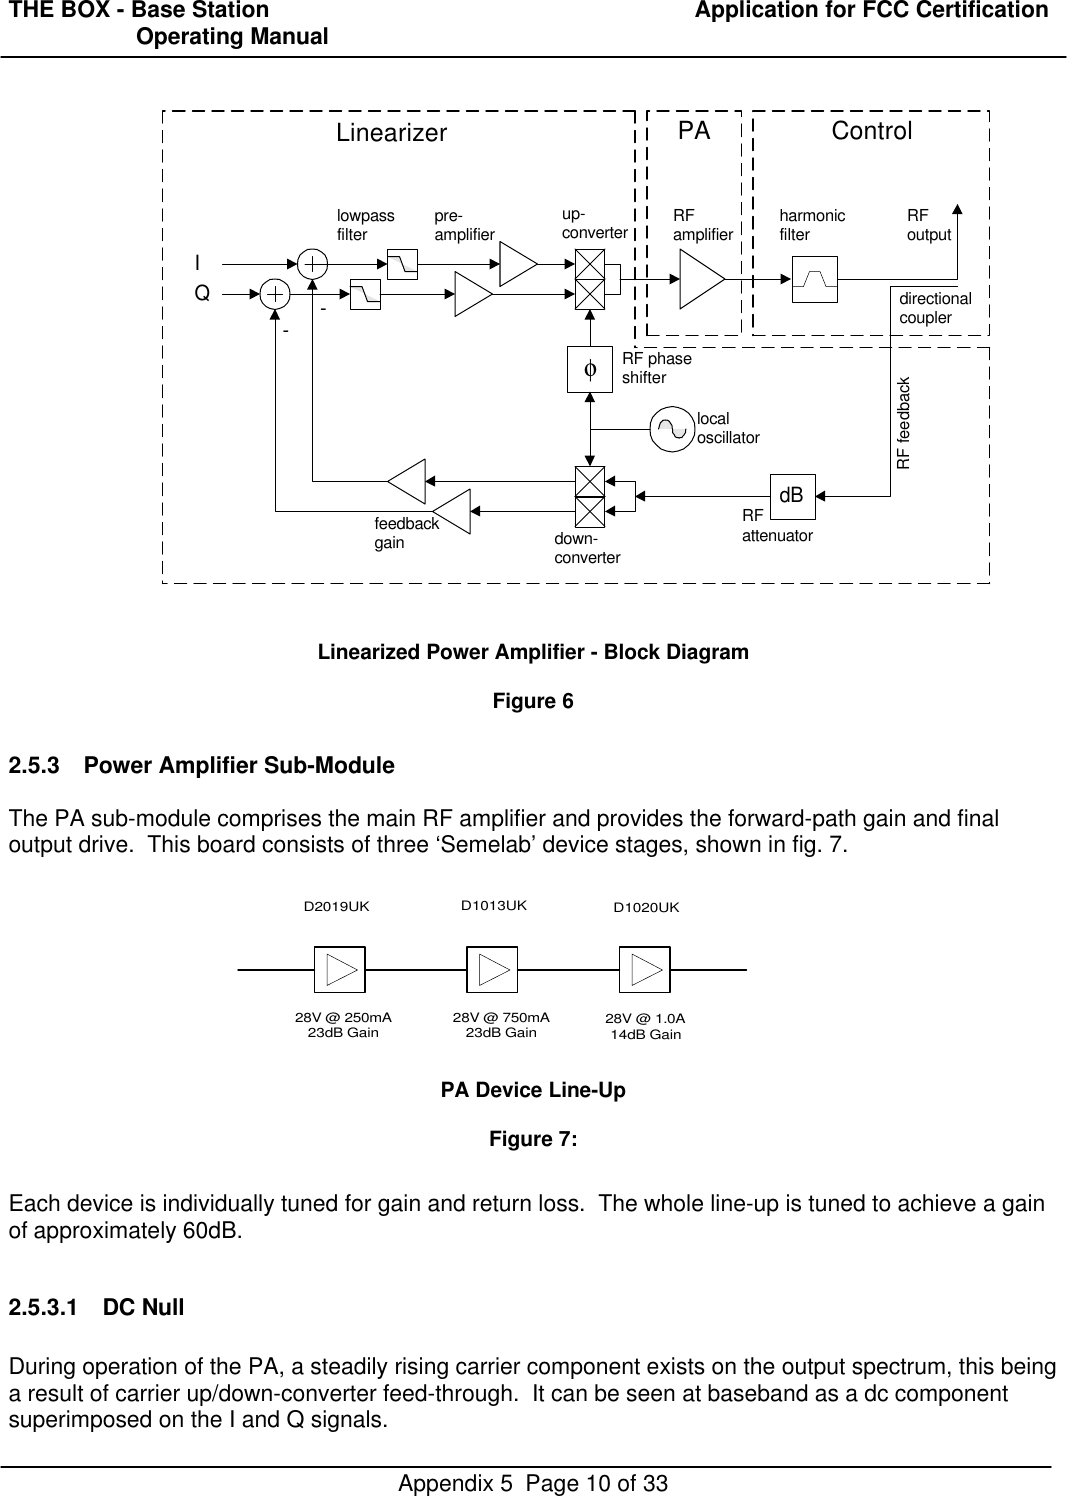 THE BOX - Base Station  Application for FCC Certification                    Operating ManualAppendix 5  Page 10 of 33Linearized Power Amplifier - Block DiagramFigure 62.5.3 Power Amplifier Sub-ModuleThe PA sub-module comprises the main RF amplifier and provides the forward-path gain and finaloutput drive.  This board consists of three ‘Semelab’ device stages, shown in fig. 7.D2019UK D1013UK D1020UK28V @ 250mA23dB Gain 28V @ 750mA23dB Gain 28V @ 1.0A14dB GainPA Device Line-UpFigure 7:Each device is individually tuned for gain and return loss.  The whole line-up is tuned to achieve a gainof approximately 60dB.2.5.3.1 DC NullDuring operation of the PA, a steadily rising carrier component exists on the output spectrum, this beinga result of carrier up/down-converter feed-through.  It can be seen at baseband as a dc componentsuperimposed on the I and Q signals.PA ControlIQup-converterdown-converterRFamplifier harmonicfilterRFattenuatordBfeedbackgainlowpassfilterlocaloscillator -  -φRF phaseshifterdirectionalcouplerRFoutputpre-amplifierLinearizerRF feedback